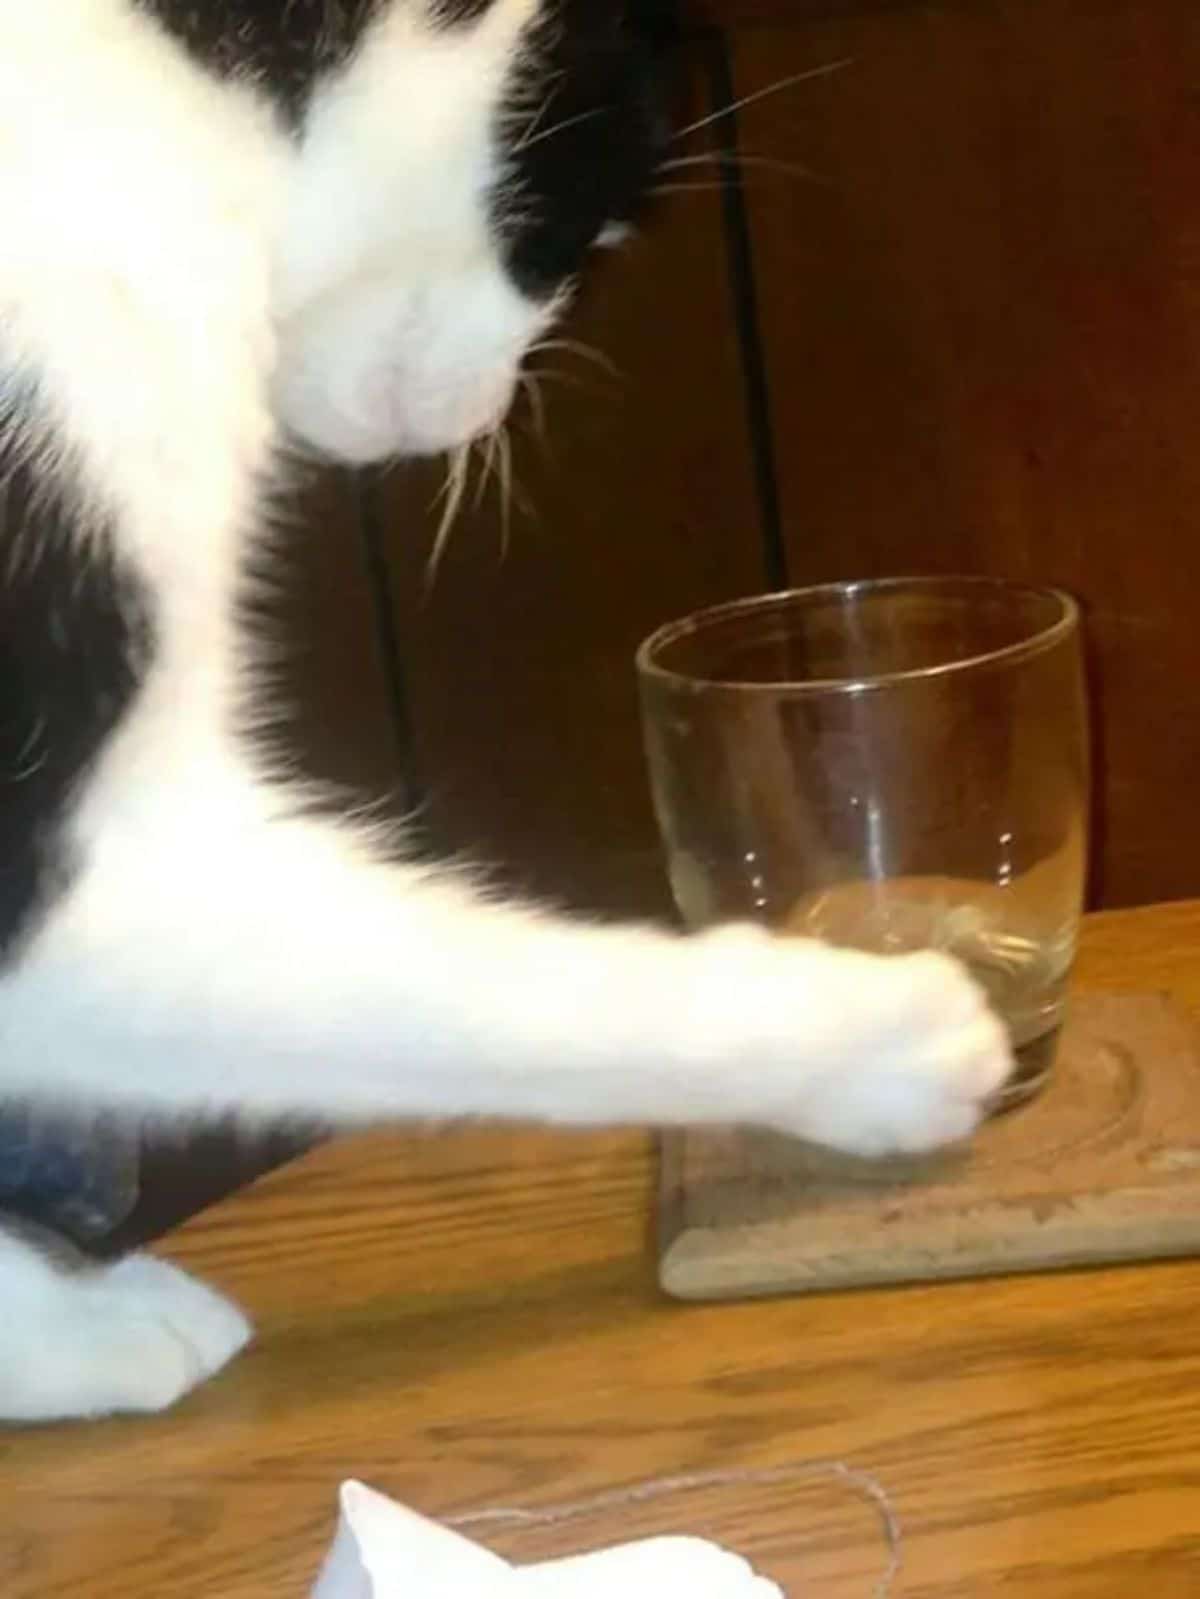 black and white cat on a wooden table swatting at a glass on a brown coaster